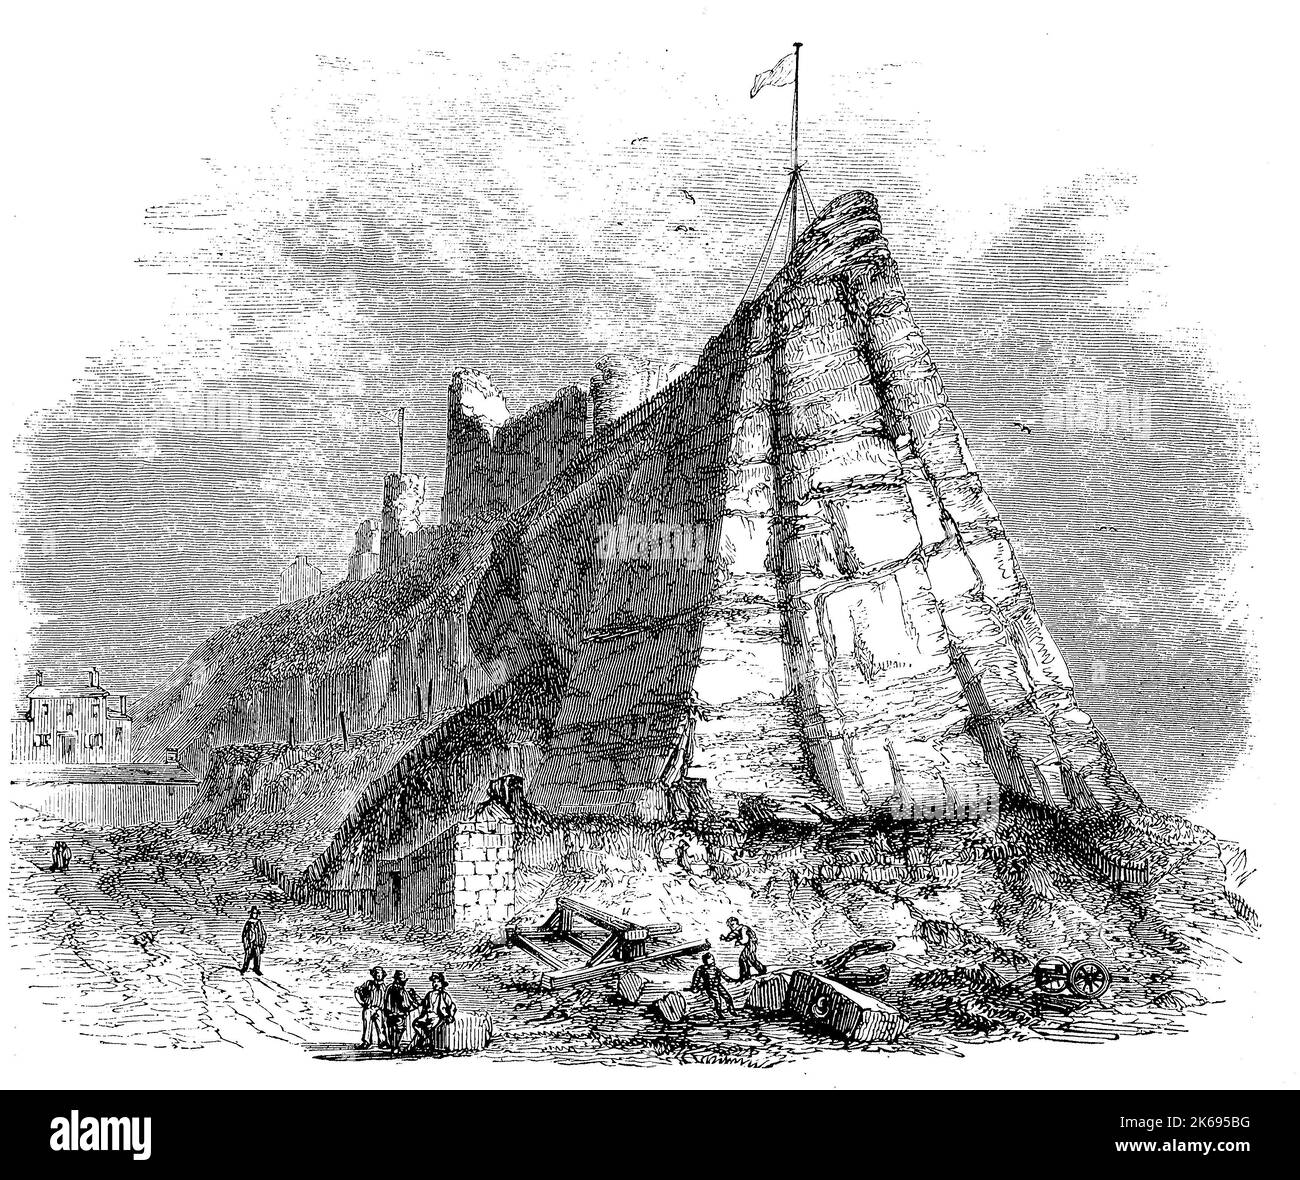 Digital improved reproduction, Remains of Hasting's castle, East Sussex, England, original woodprint from th 19th century Stock Photo